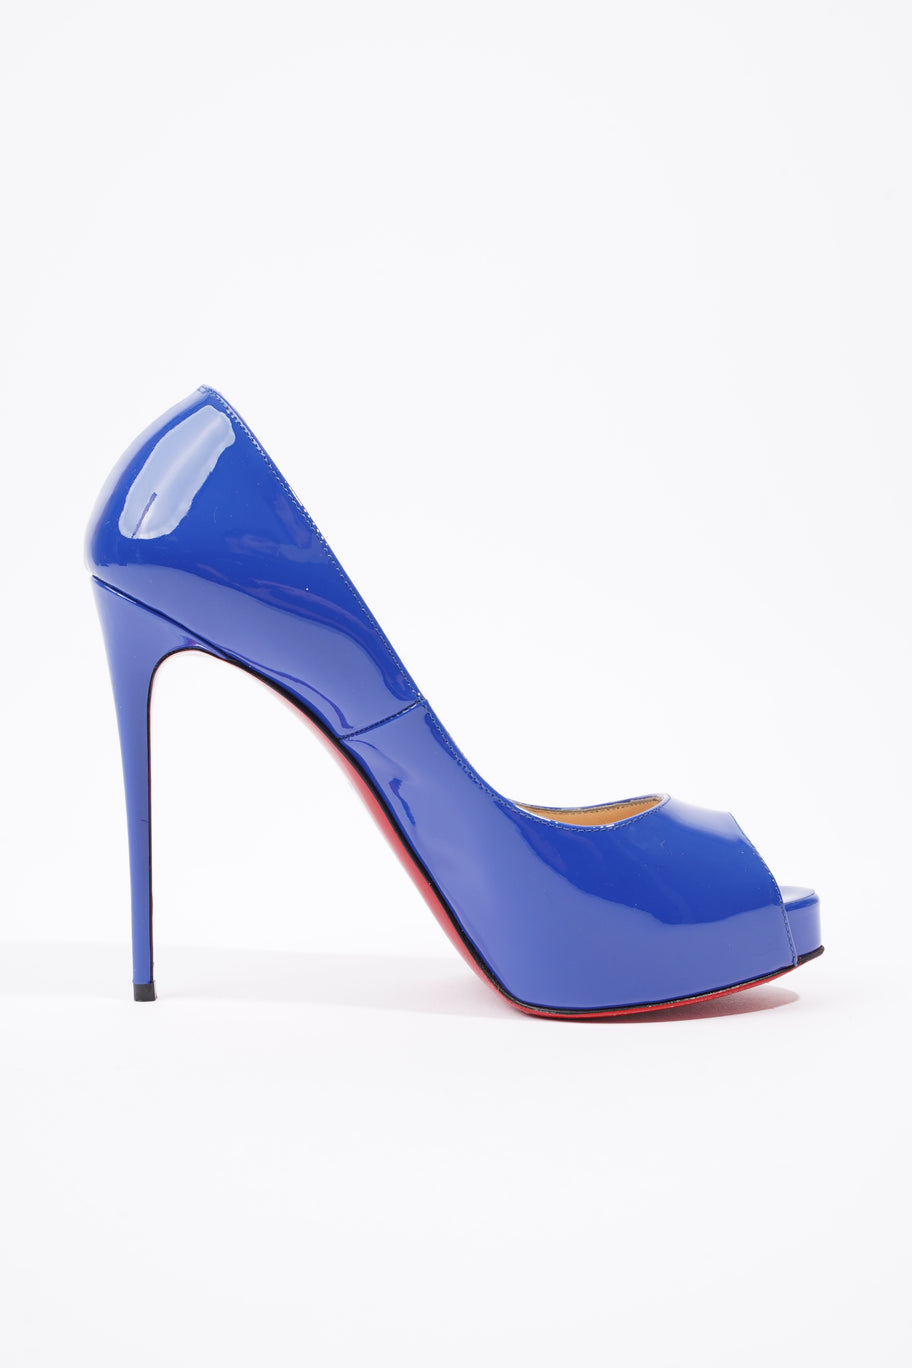 New Very Prive Heels 120 Blue Patent Leather EU 37.5 UK 4.5 Image 4